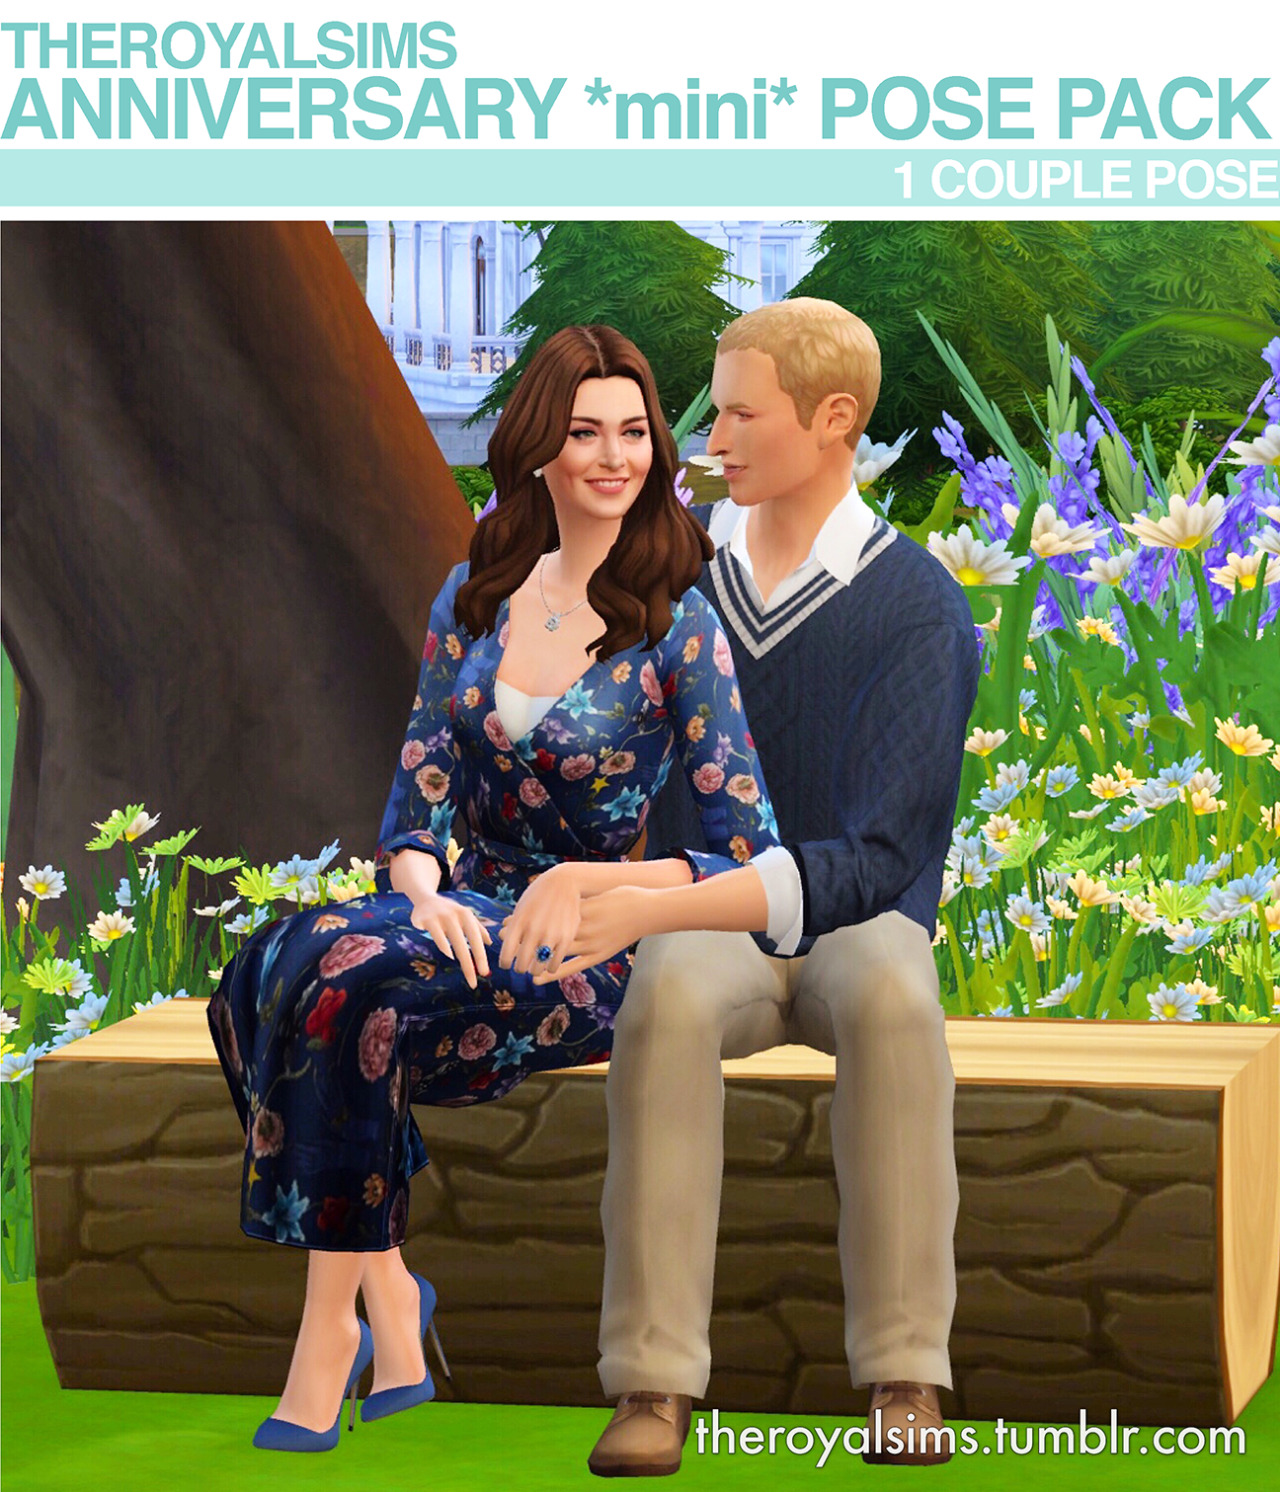 THE ROYAL SIMS — THEROYALSIMS ANNIVERSARY *MINI* POSE PACK Hello...